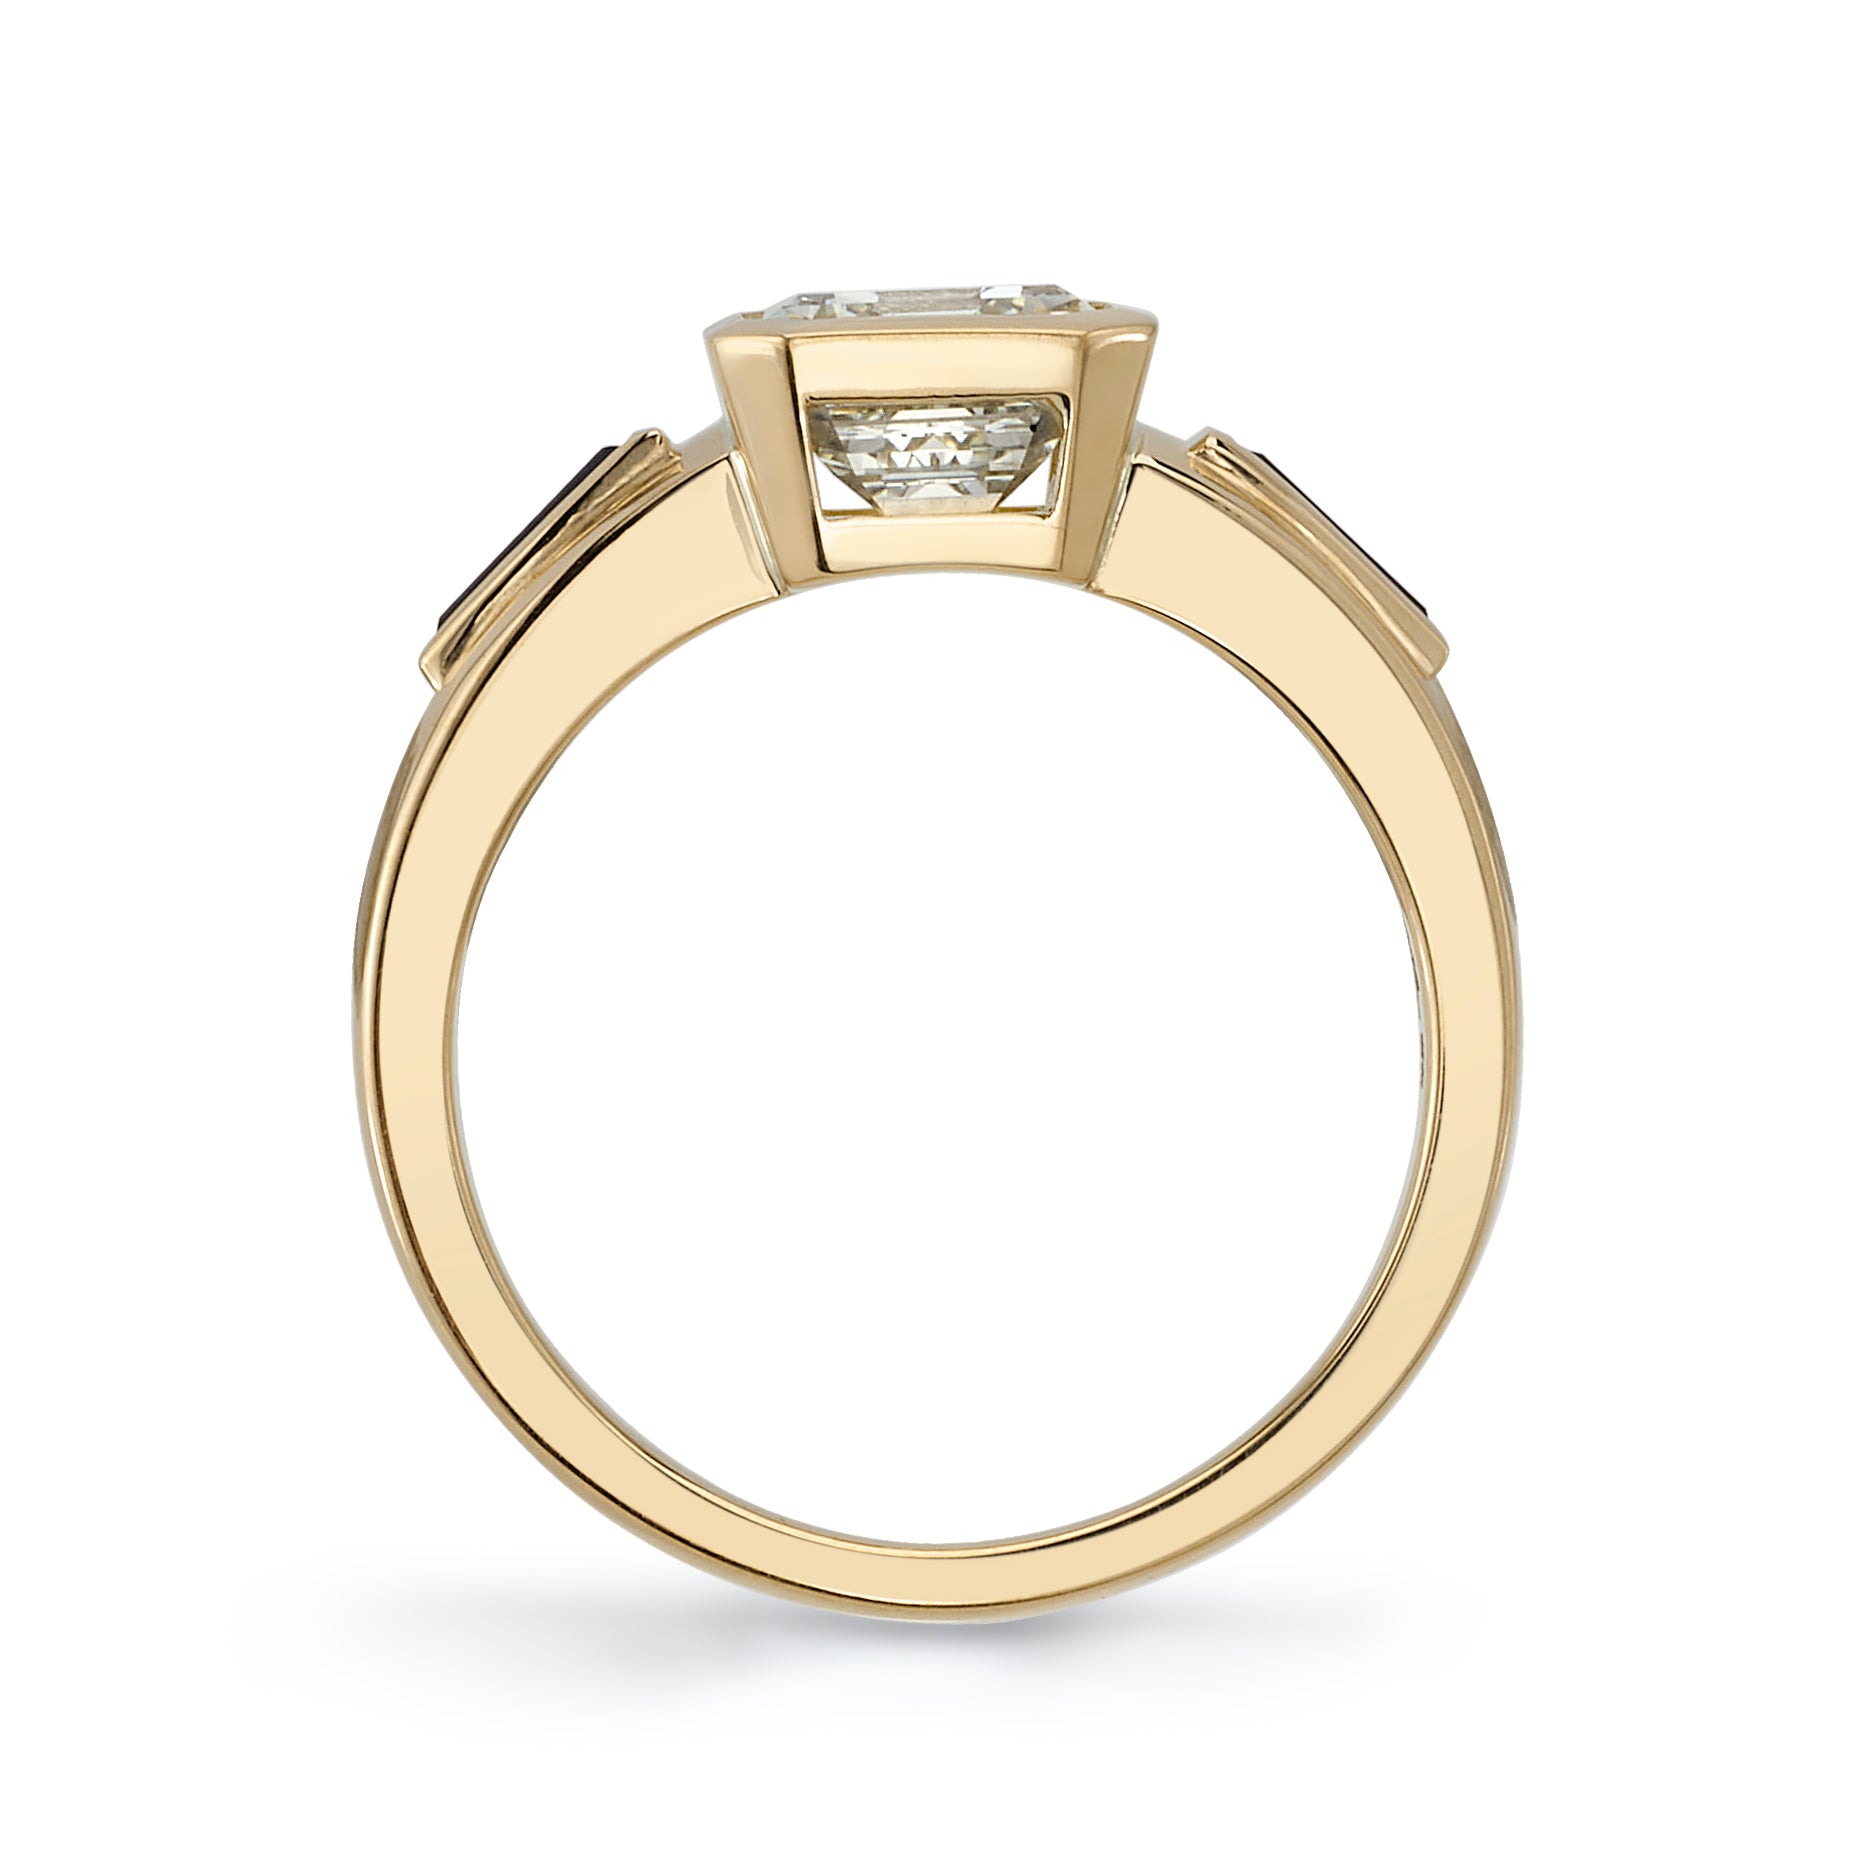 SINGLE STONE LAURIE RING featuring 2.09ct U-V/VS1 GIA certified emerald cut diamond with 0.73ctw baguette cut blue sapphire accents bezel set in a handcrafted 18K yellow gold mounting.